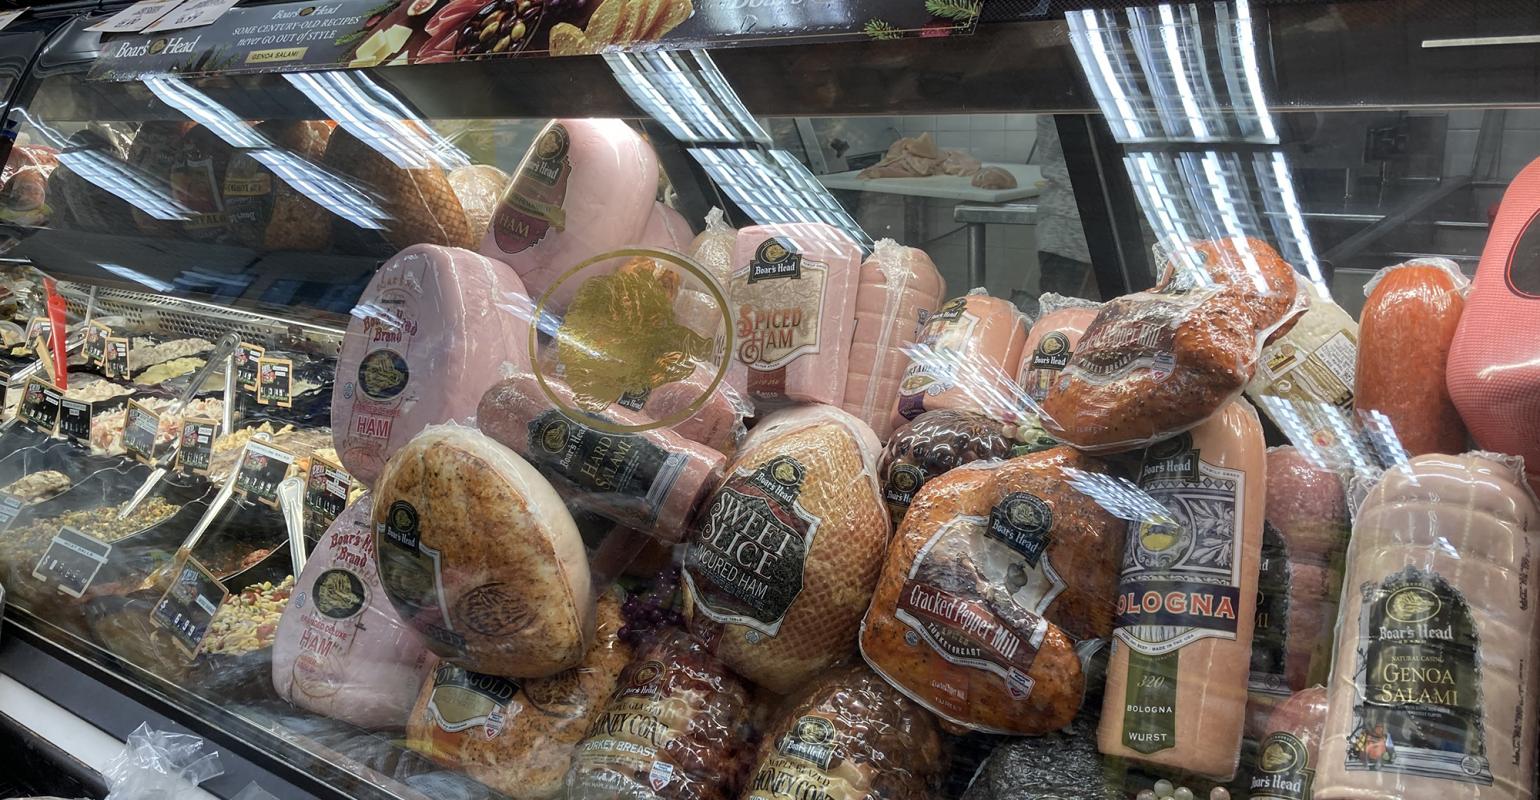 Any way you slice it, deli meats are thriving